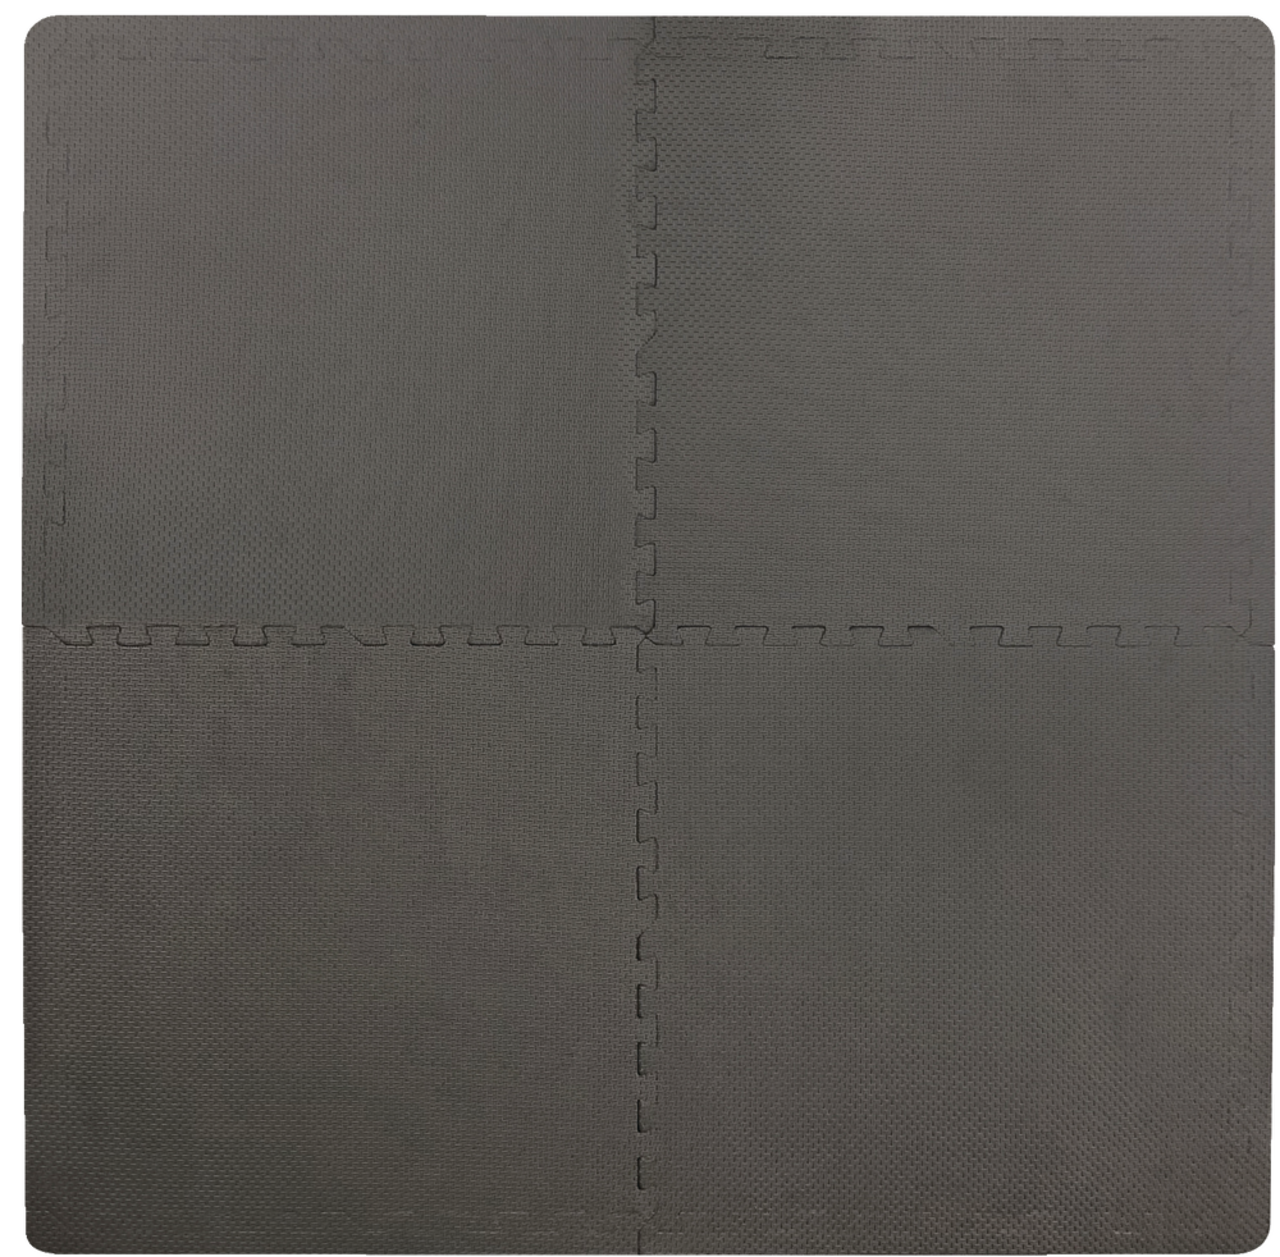 https://media-www.canadiantire.ca/product/living/home-decor/floor-window-decor/0686097/for-living-4pk-comfort-flooring-grey-24-x-24--f86c9a23-412f-406b-8e48-29017731c097.png?imdensity=1&imwidth=1244&impolicy=mZoom